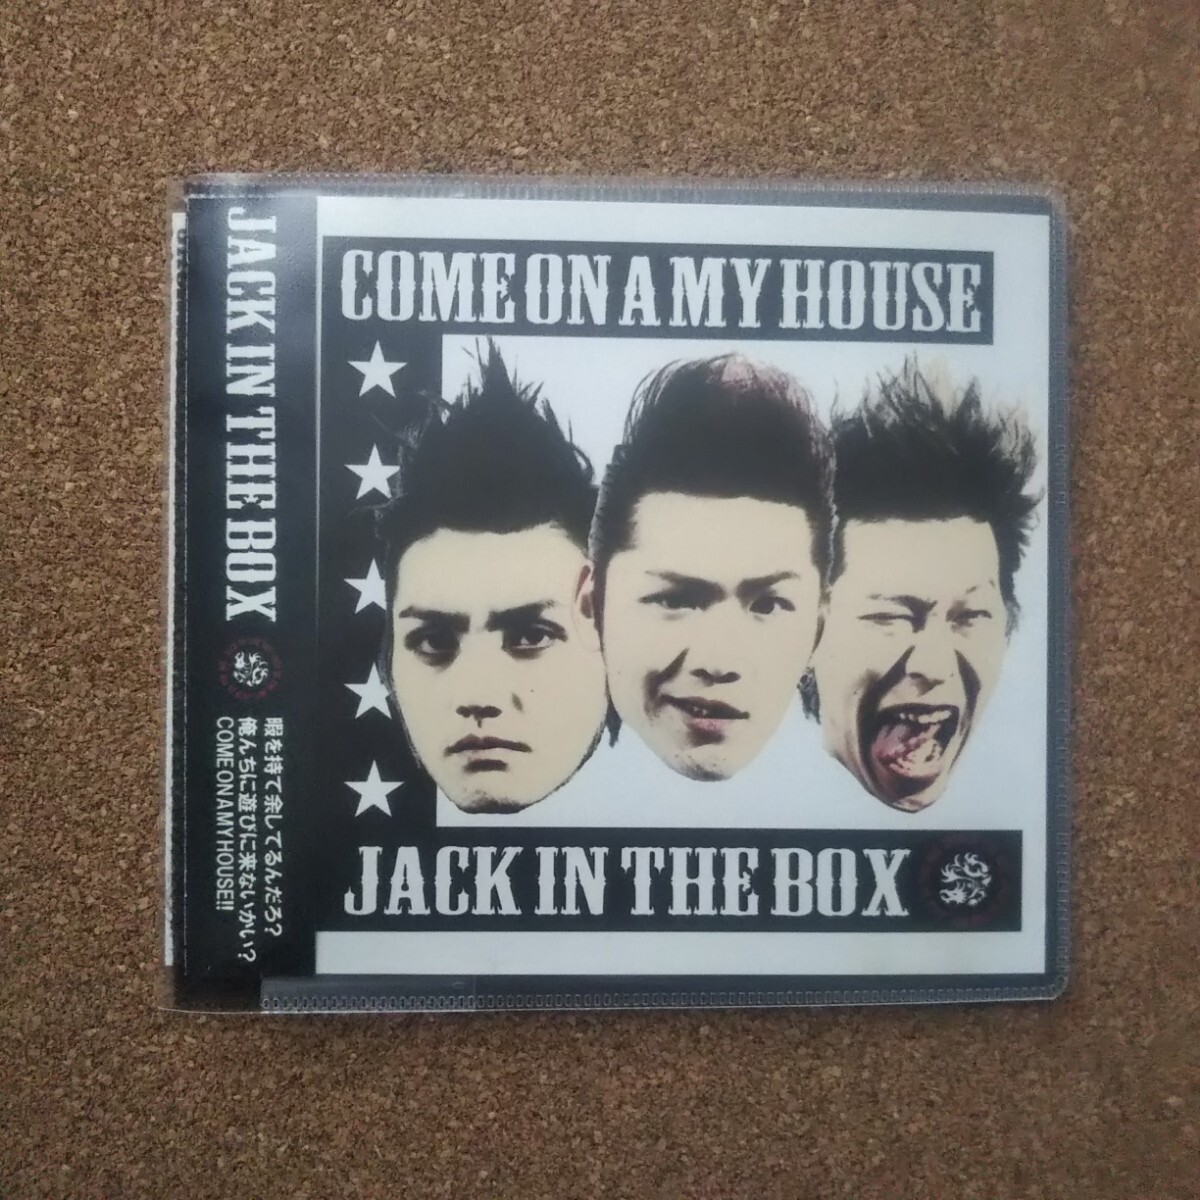 ◆CD◆JACK IN THE BOX◆COME ON A MY HOUSE◆ロックンロール◆